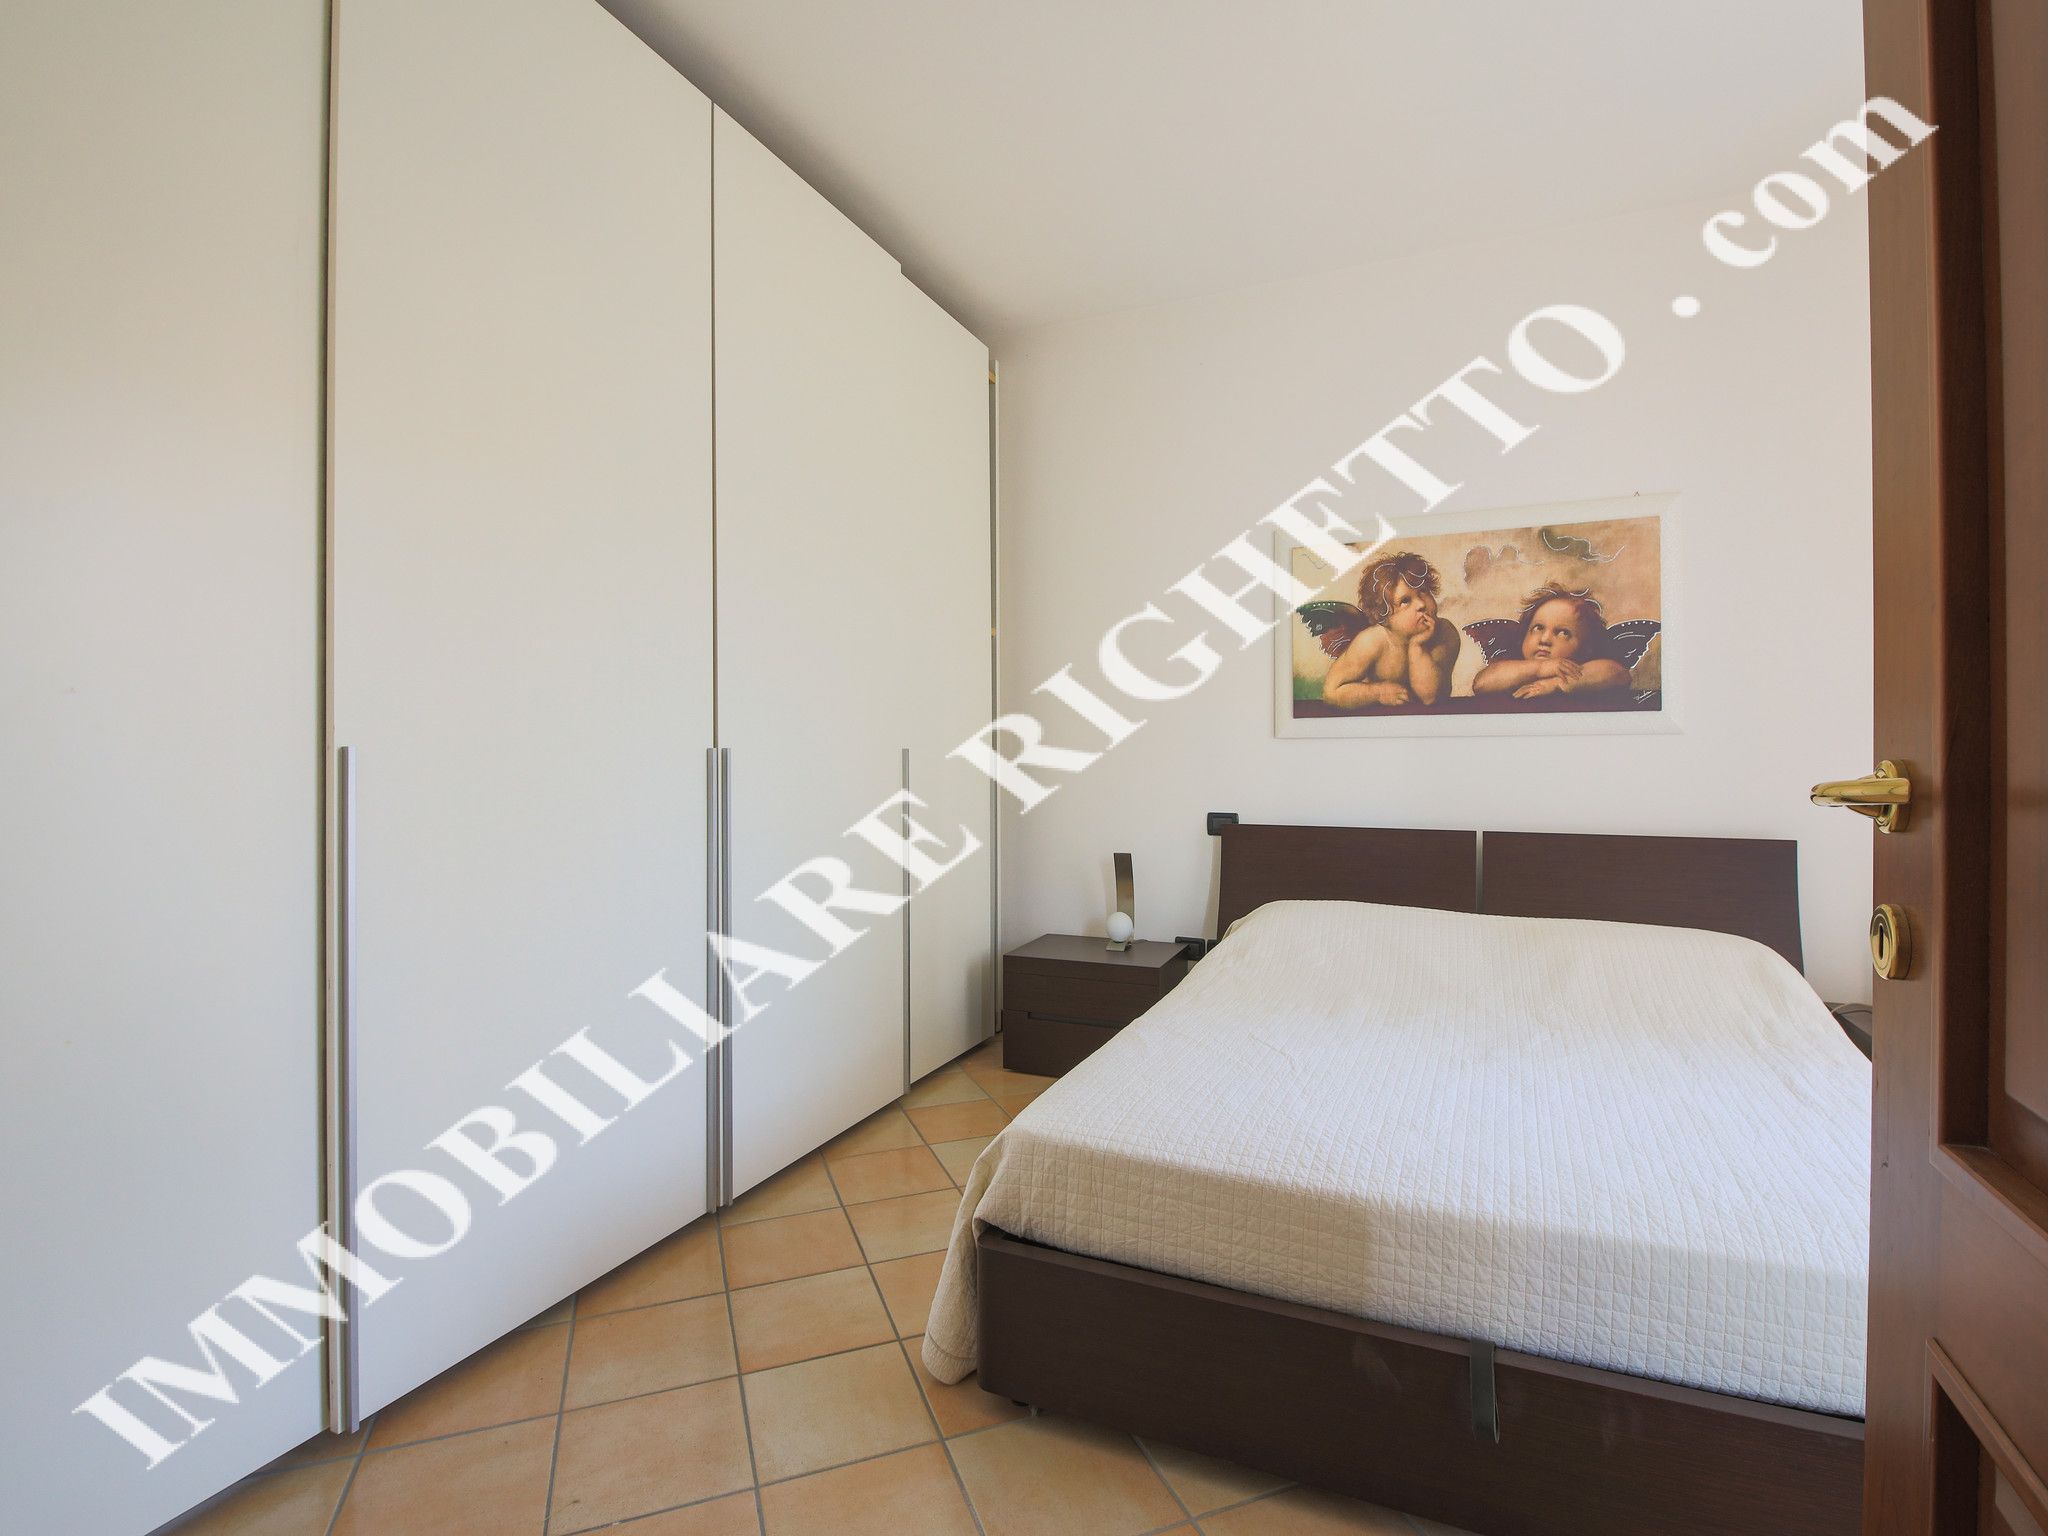 offer property for sale Spacious flat in elegant complex with swimming-pool.